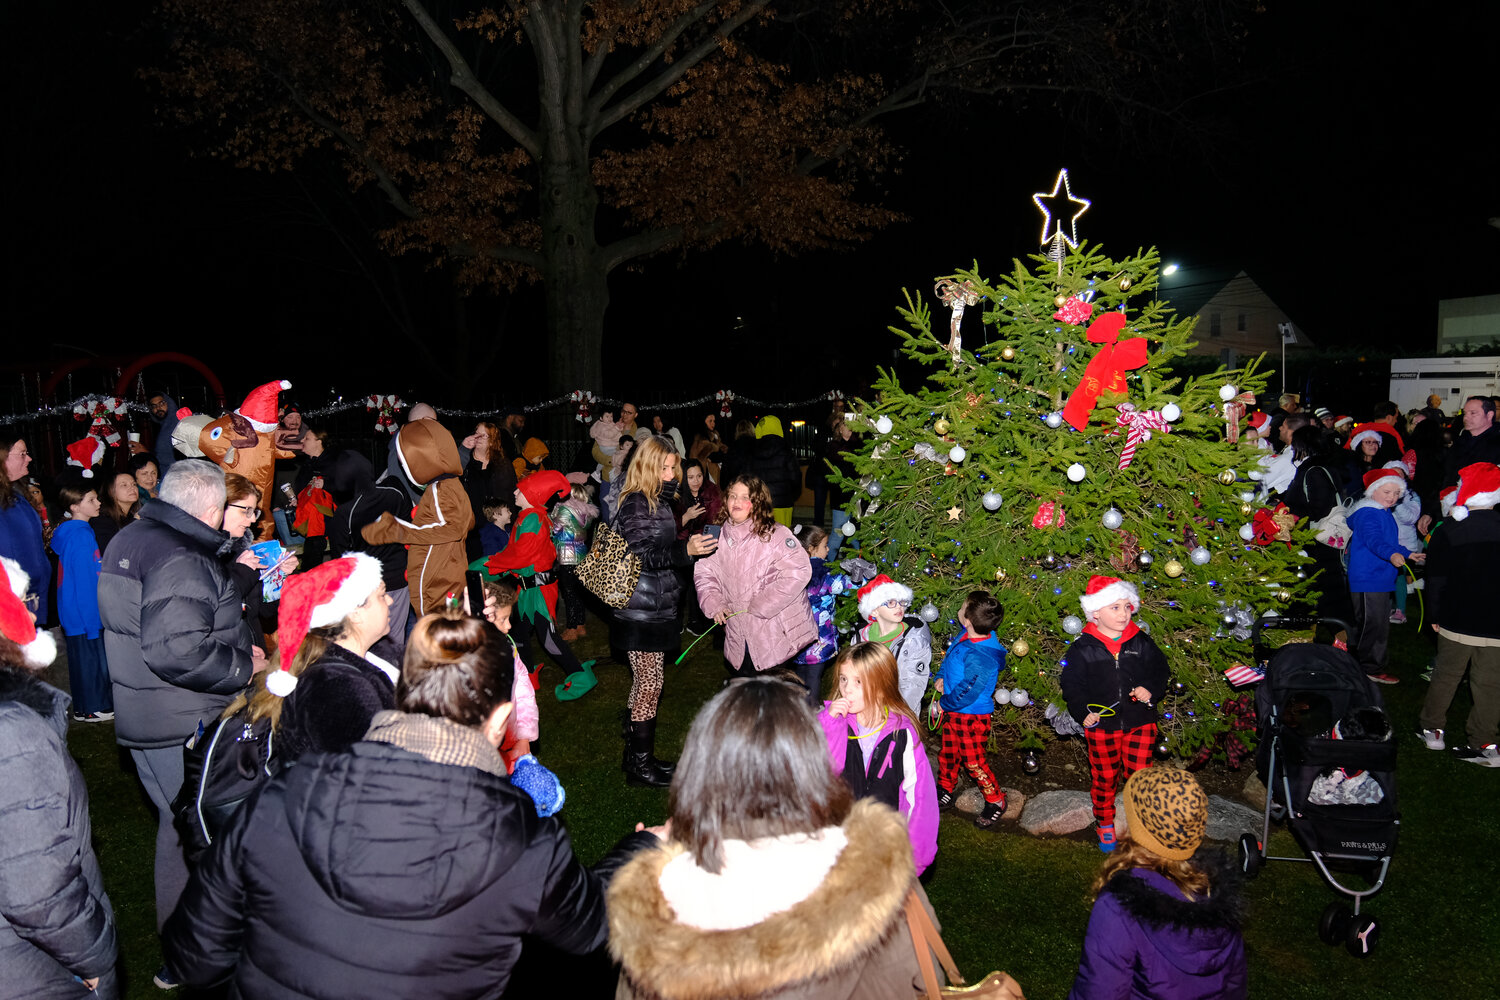 A crowd of community members watch as the tree is lit in Garden City South Park for the Community League of Garden City South’s Christmas tree lighting ceremony.